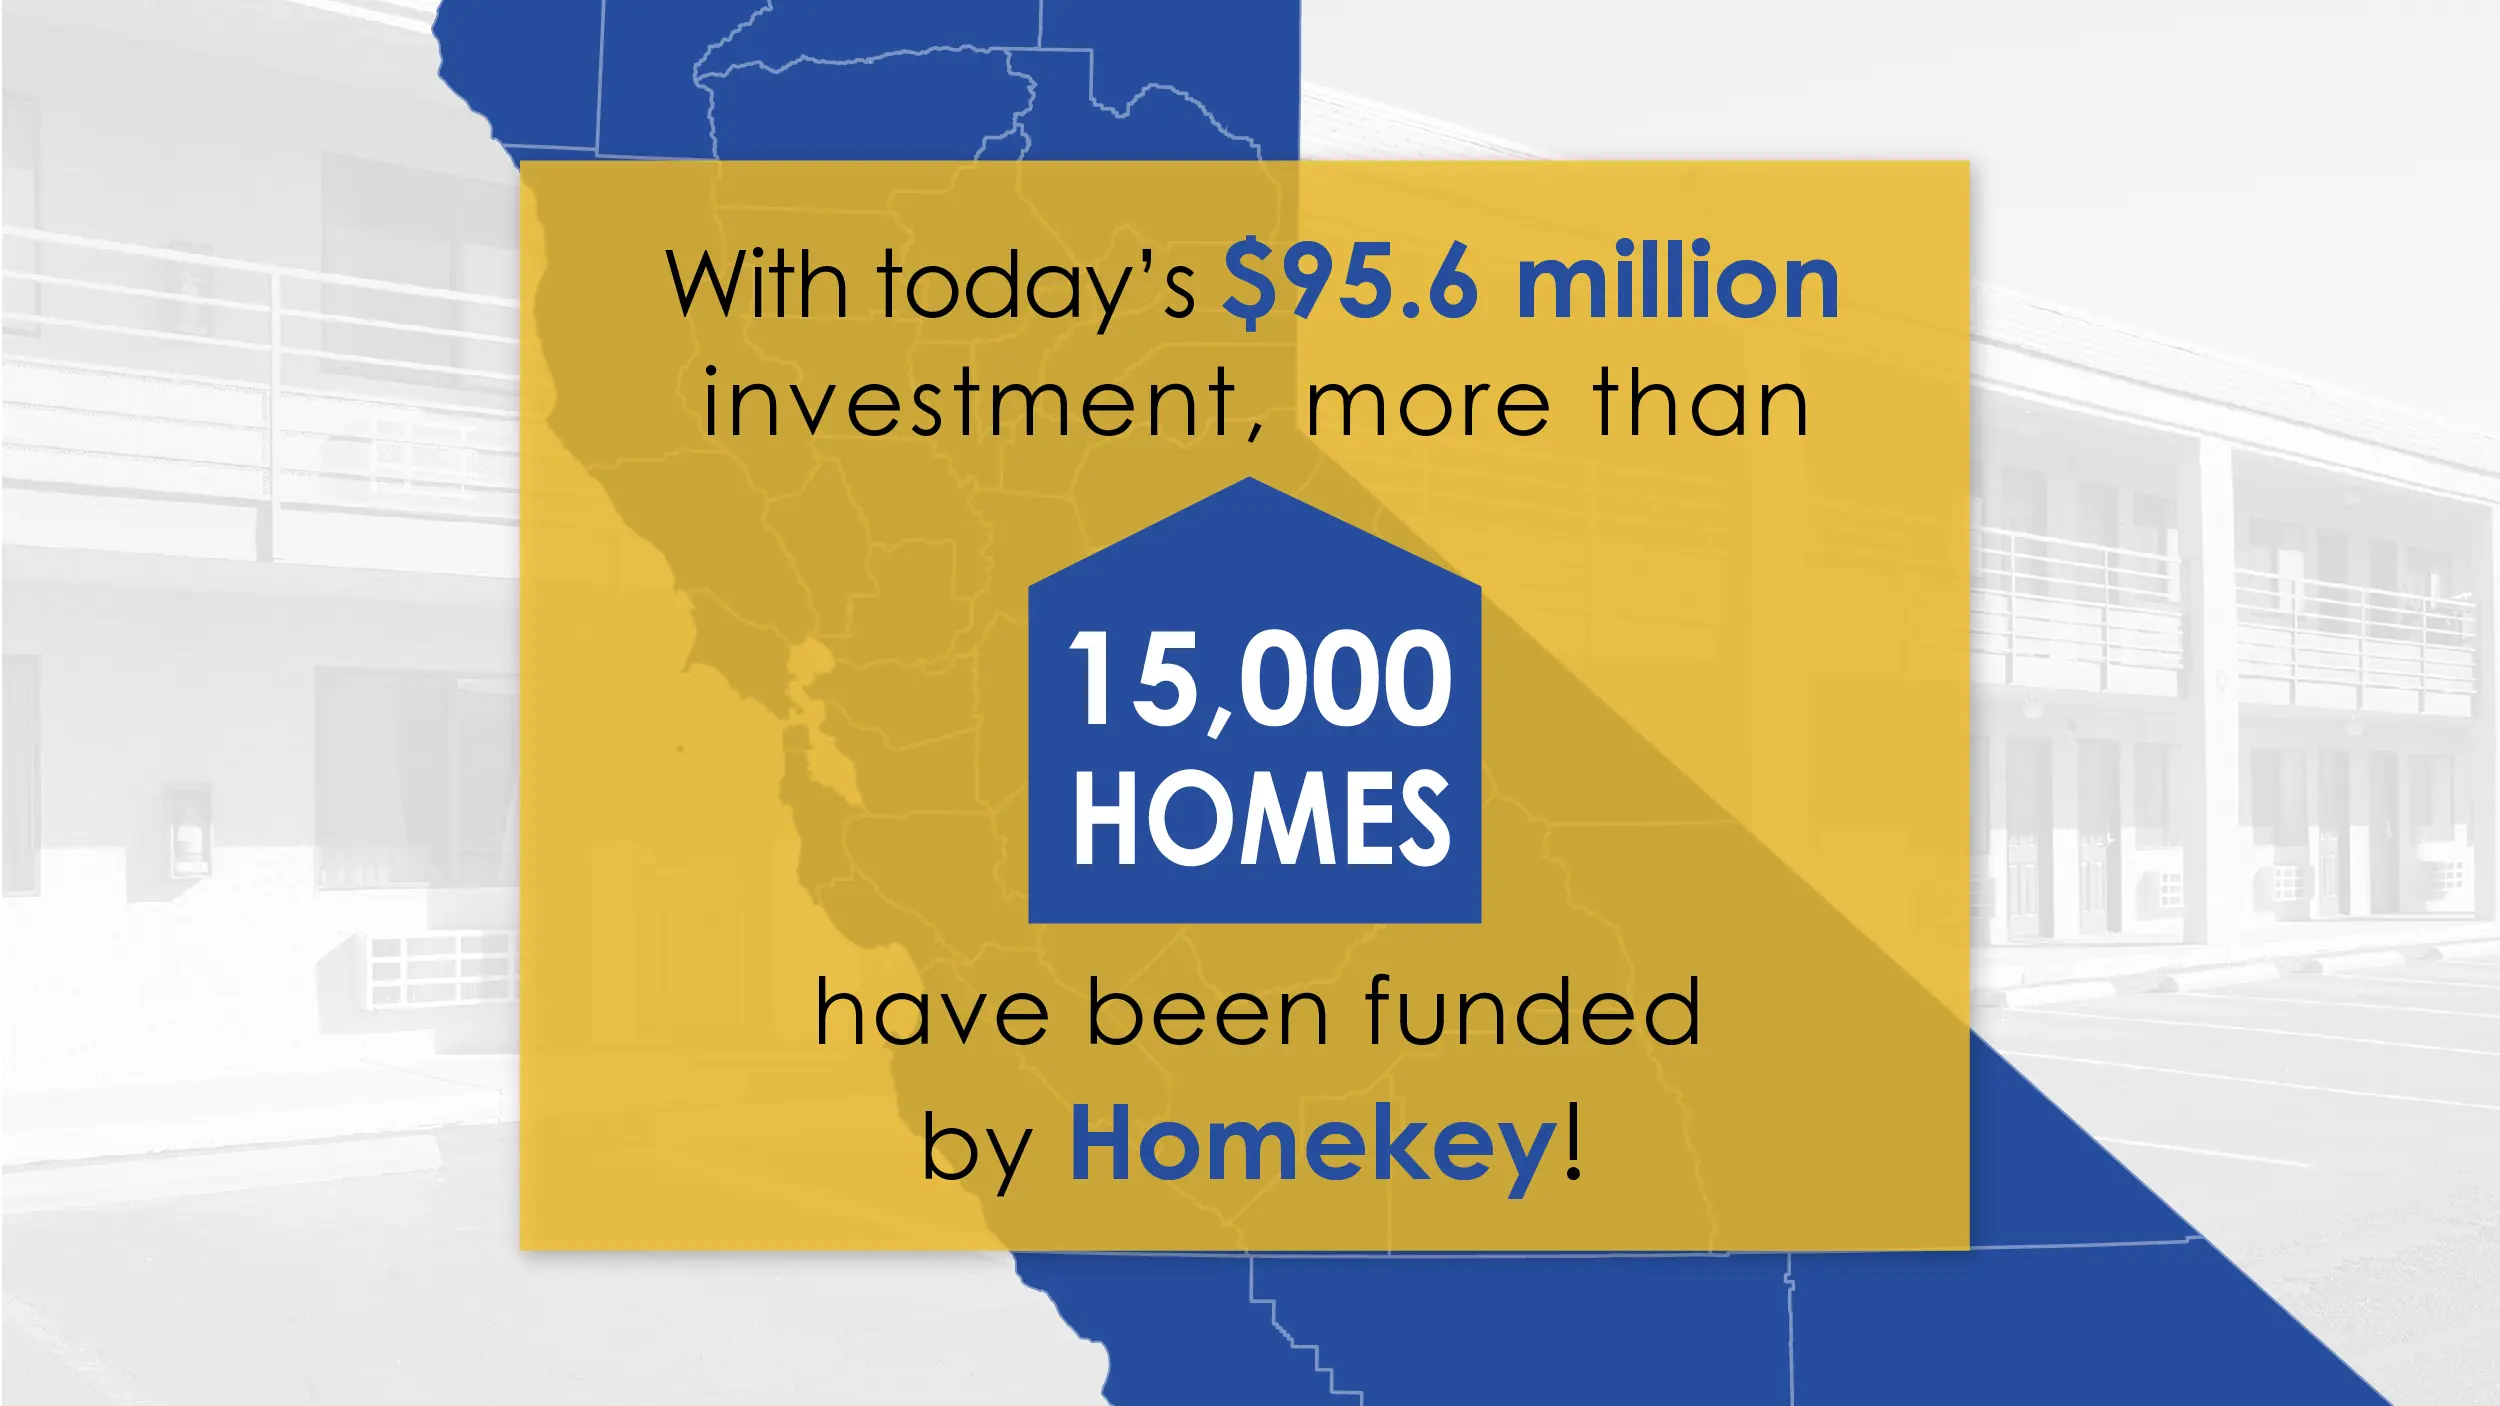 Map of California with overlay text with today's $95.6 million investment, more than 15,000 homes have been funded by Homekey!